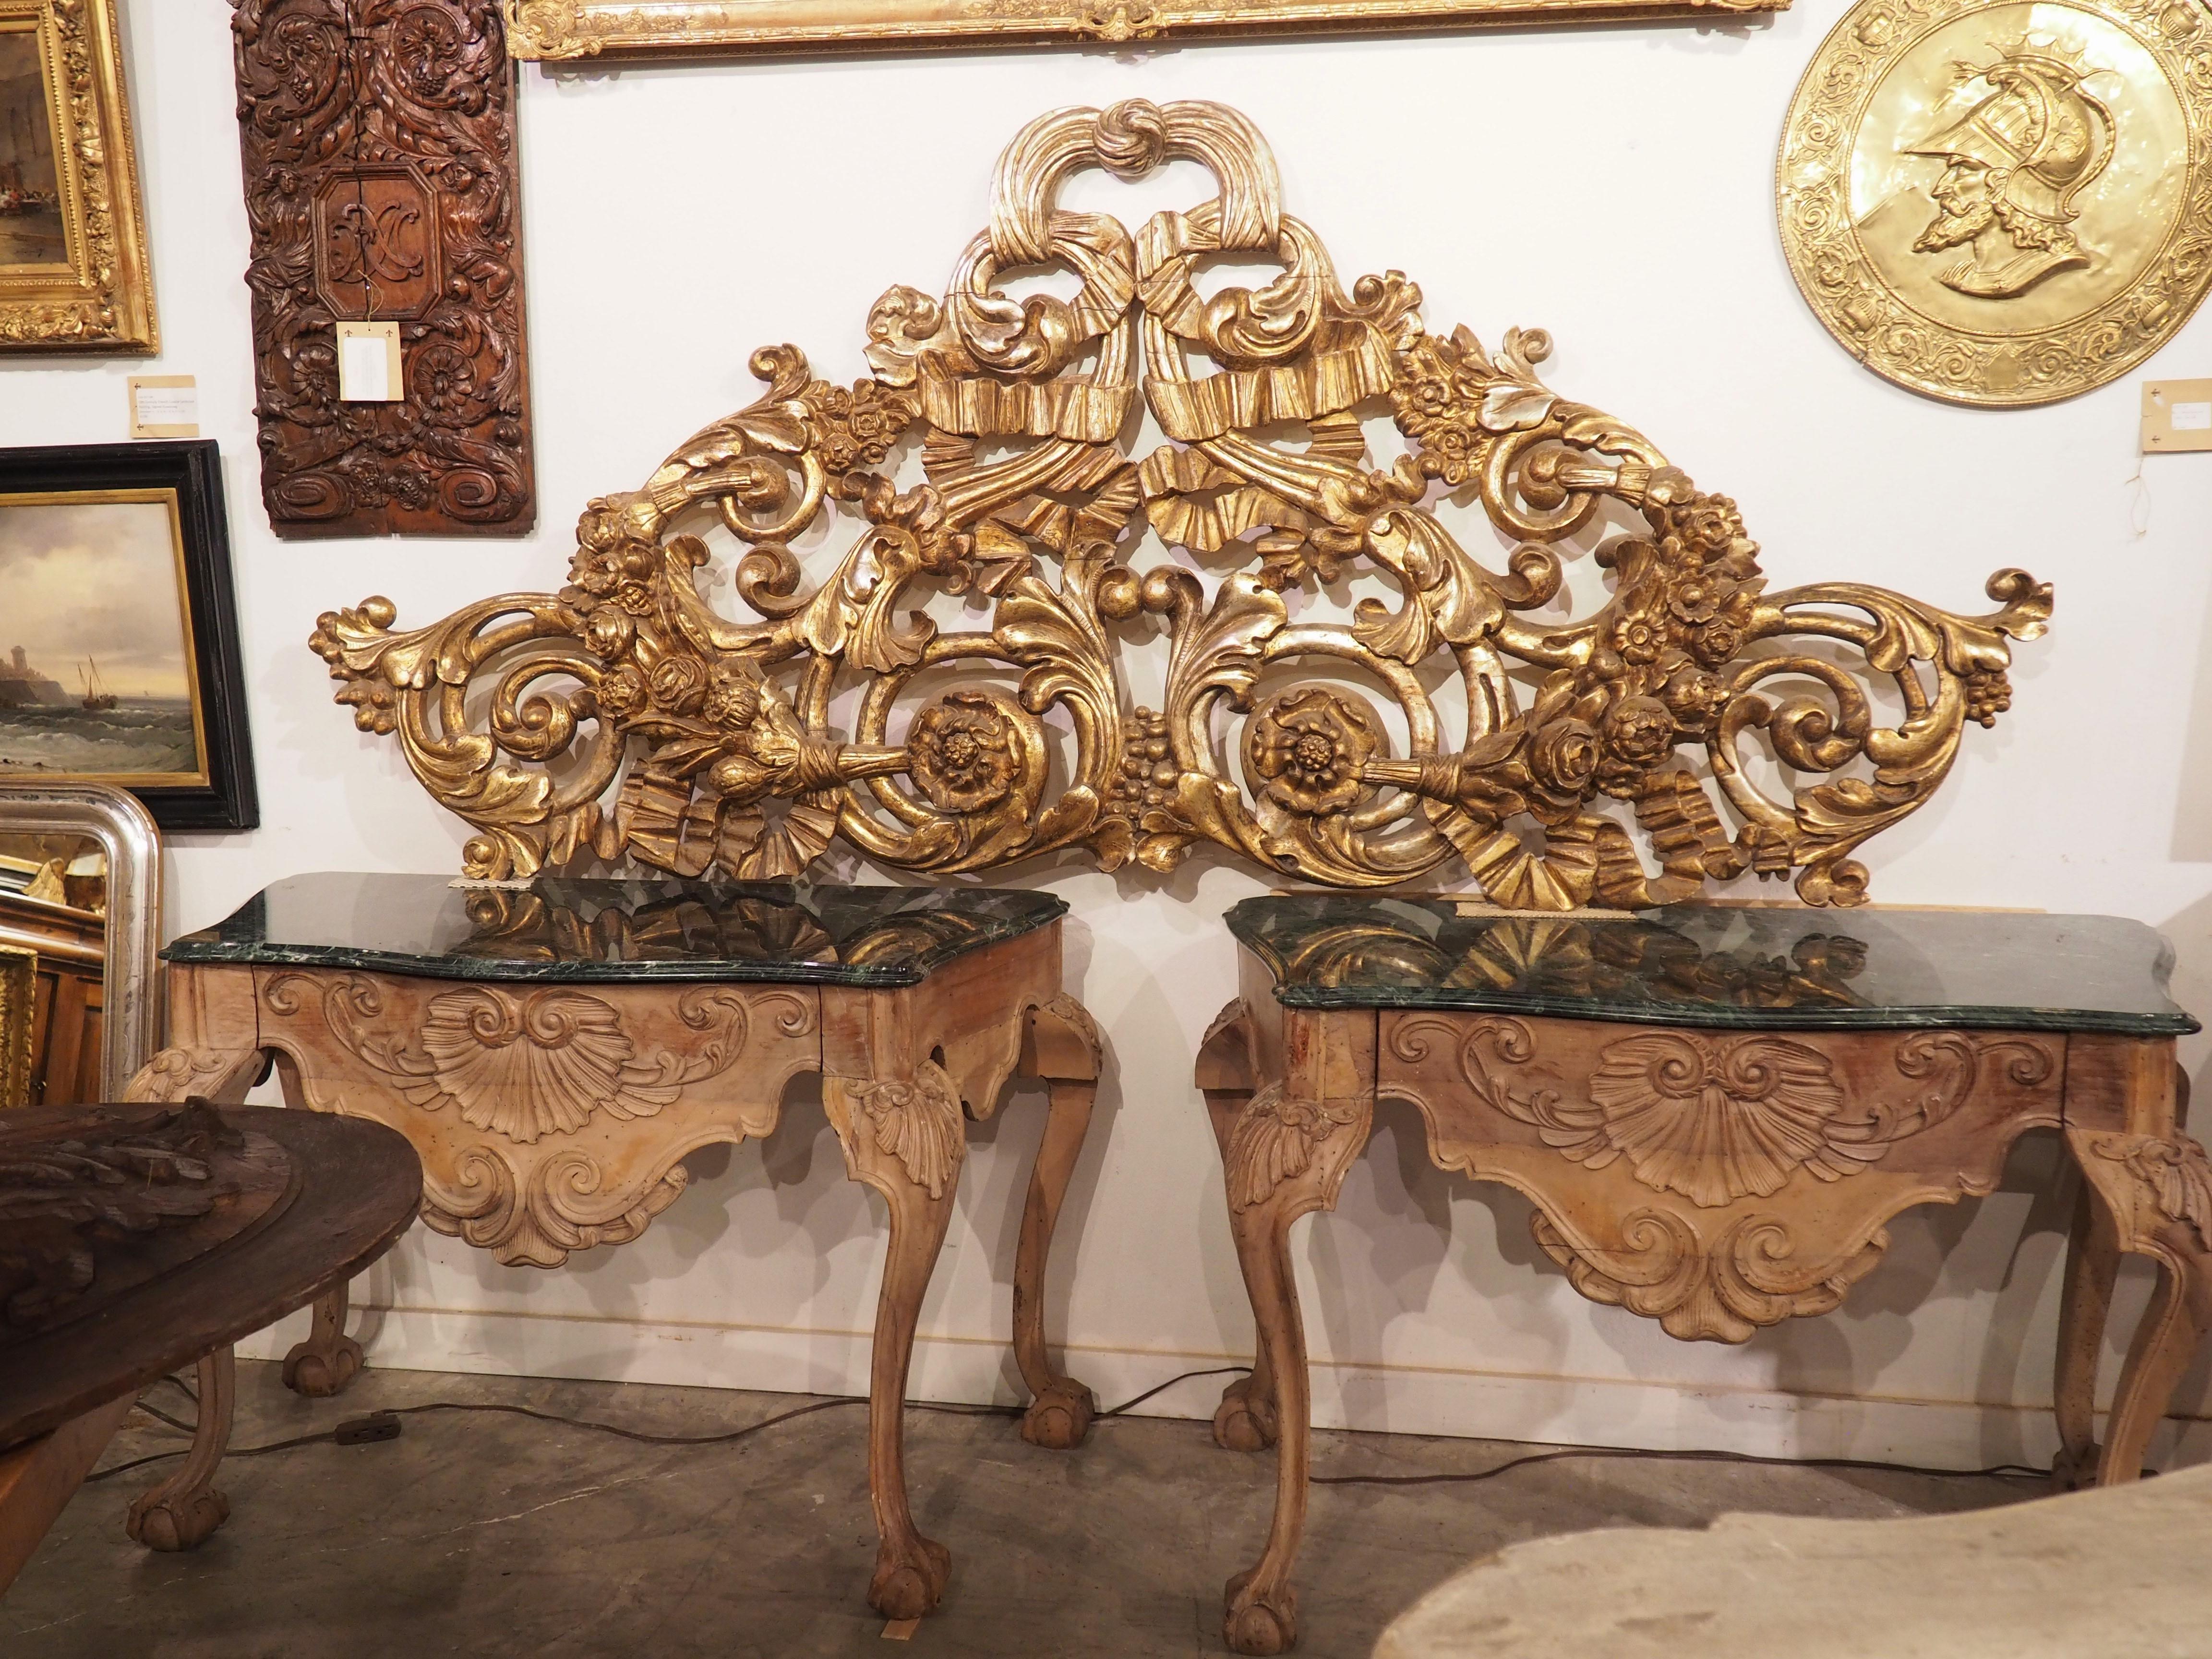 Hand-carved in Italy circa 1850, this very large giltwood architectural was finished using a process known as meccatura, which involves covering the silver gilding with a gold varnish. Time and wear to the gilding (which is normal for a piece of